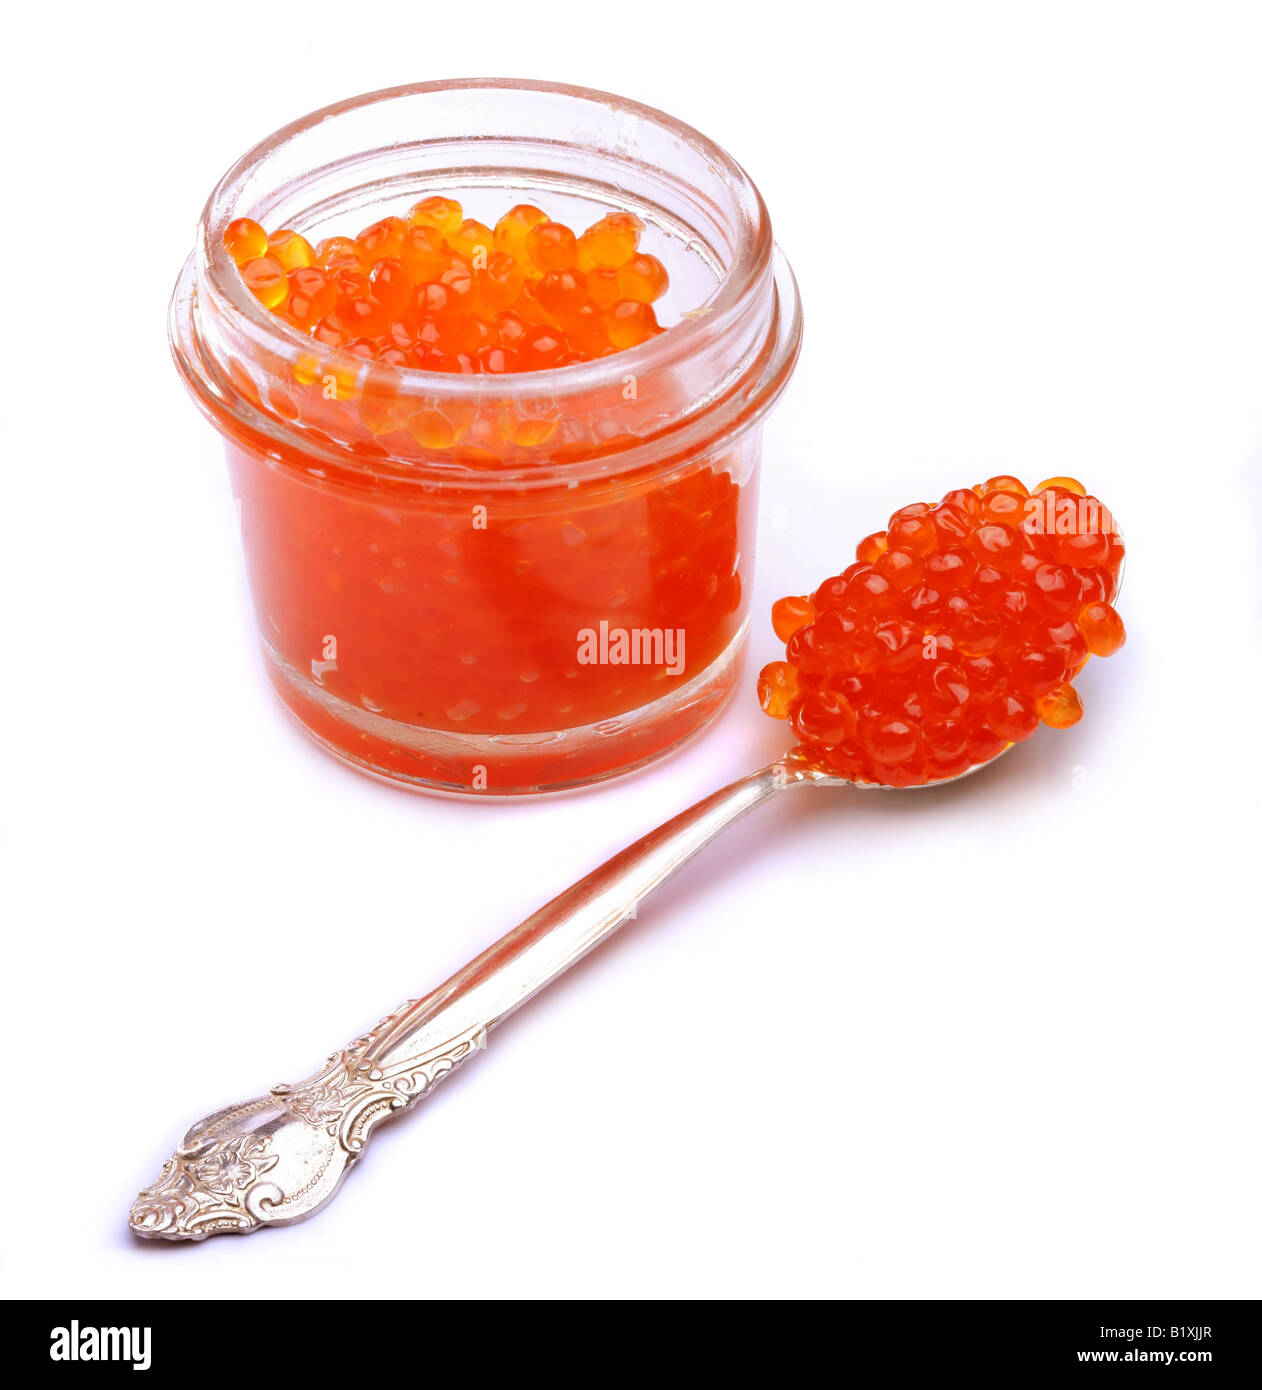 Caviar red Objects on white background Stock Photo